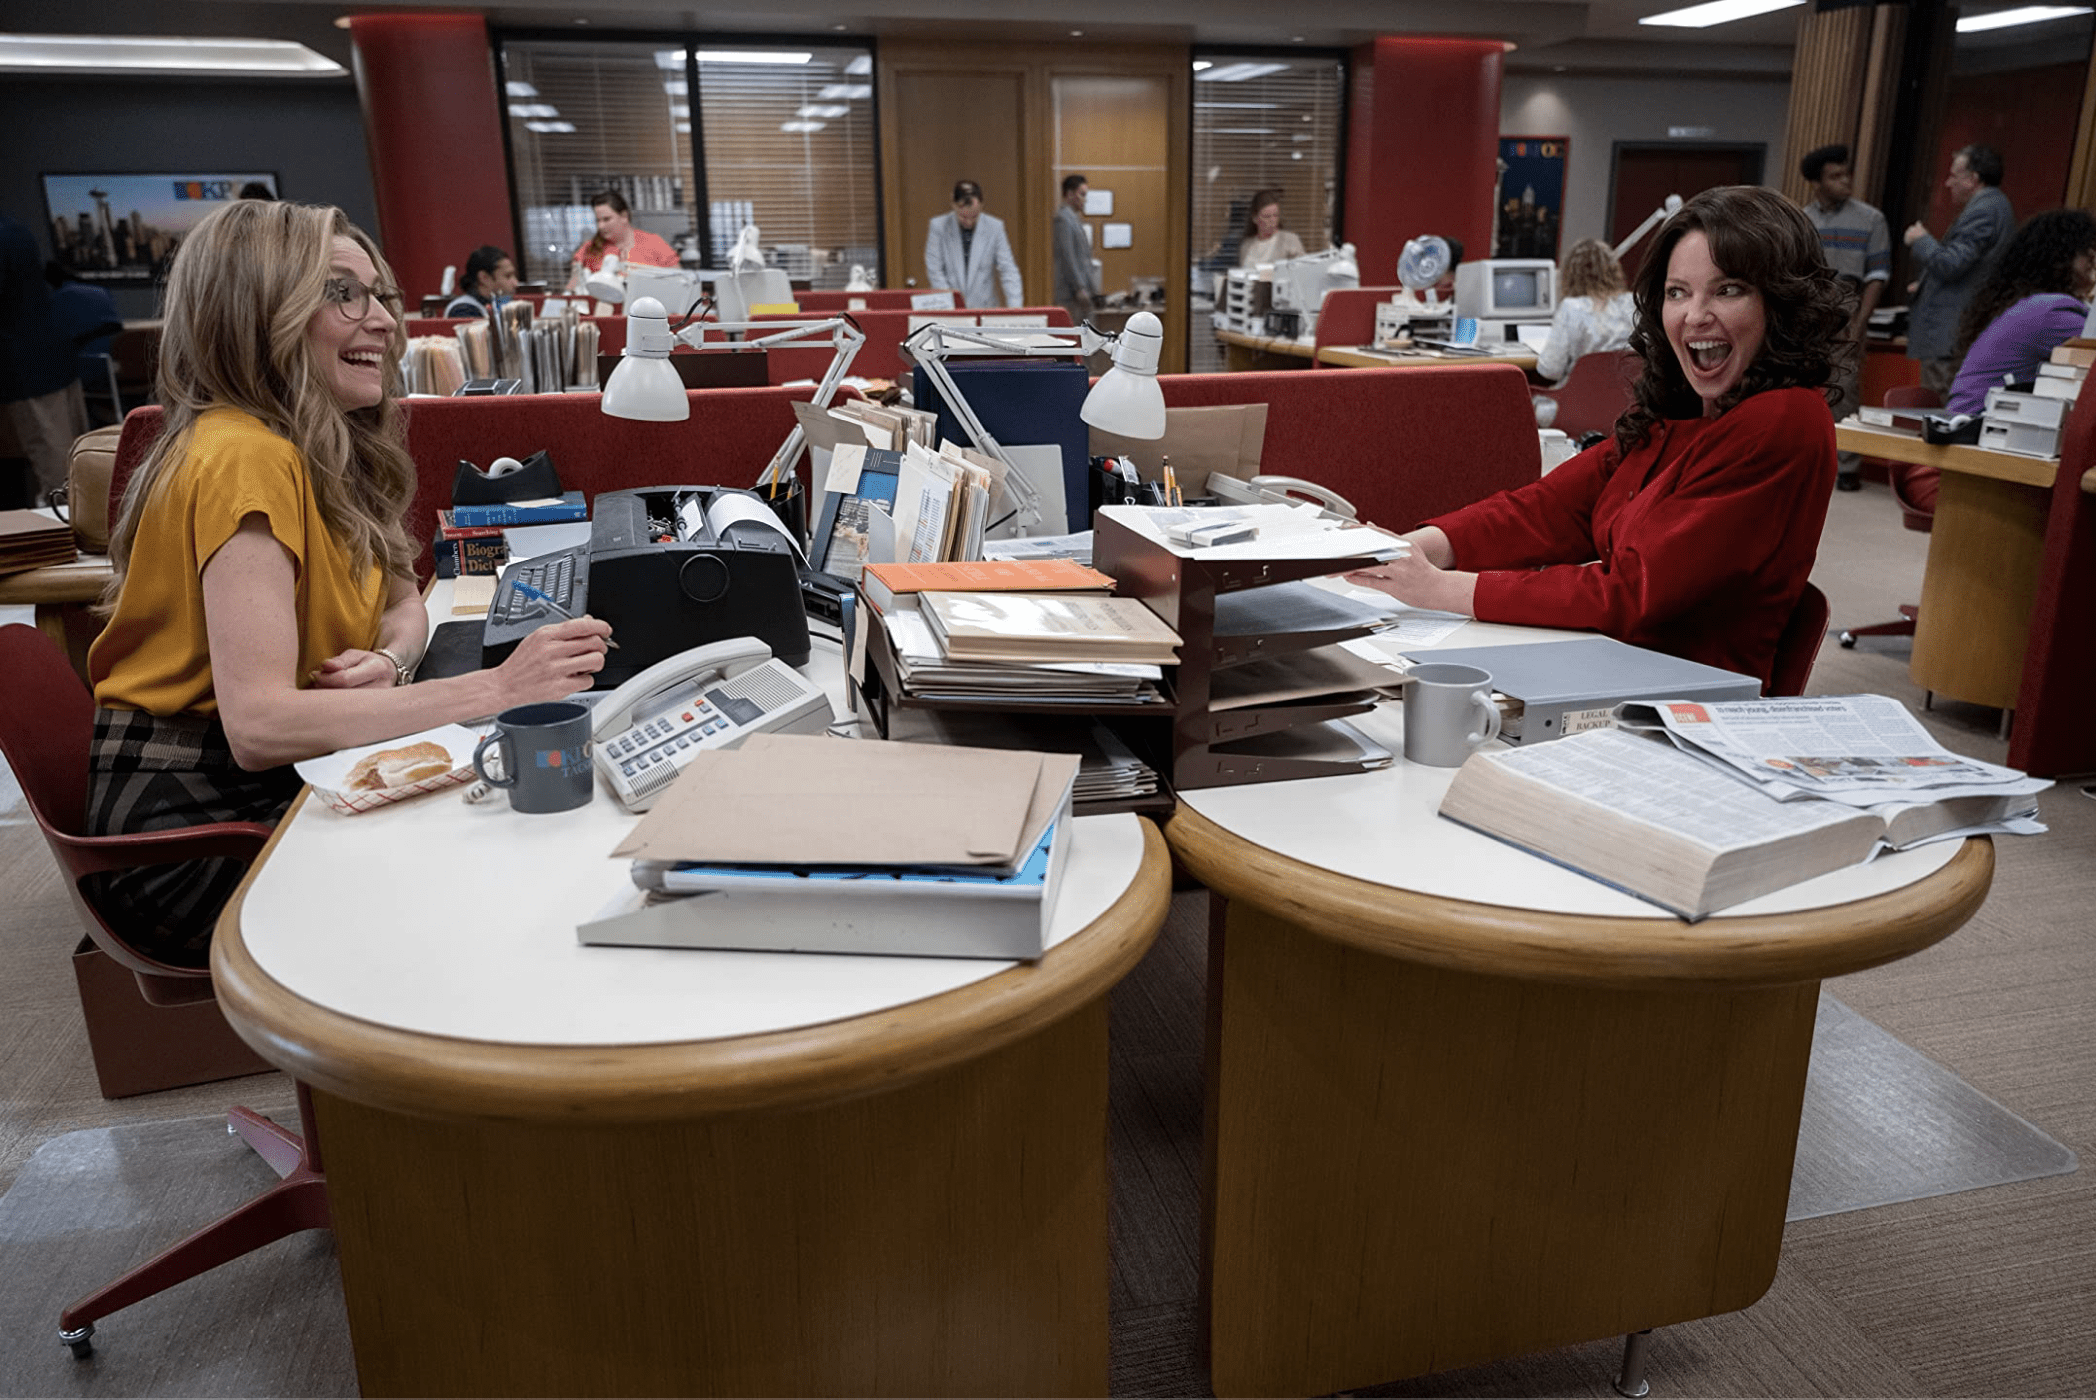 Two women laugh together in a newsroom in this image from Netflix